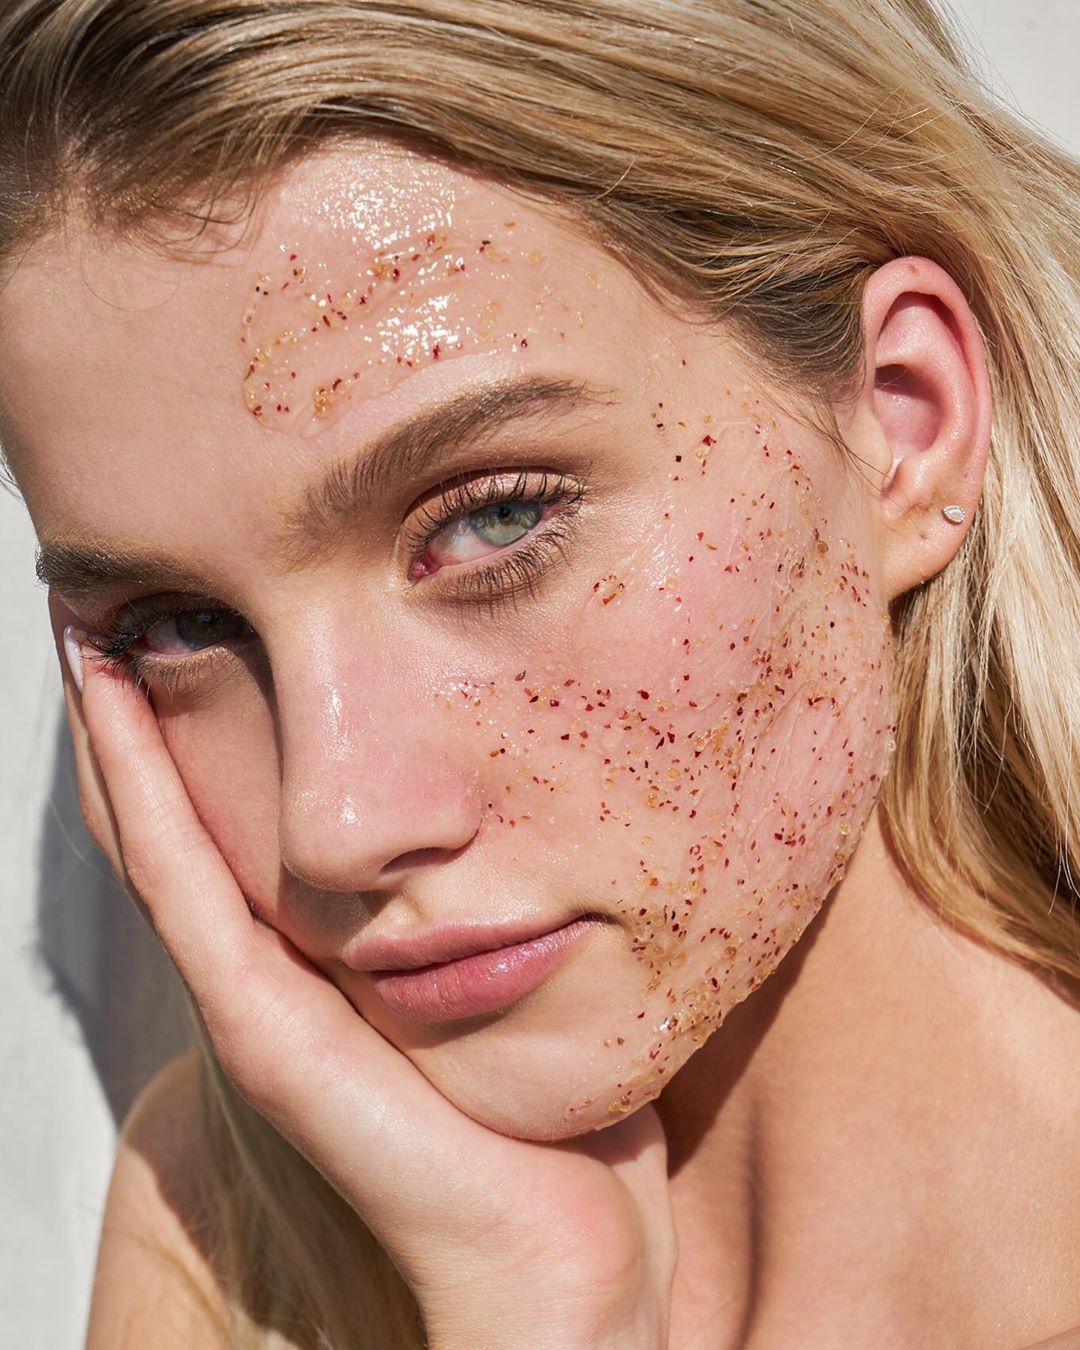 Should We Exfoliate Our Face?